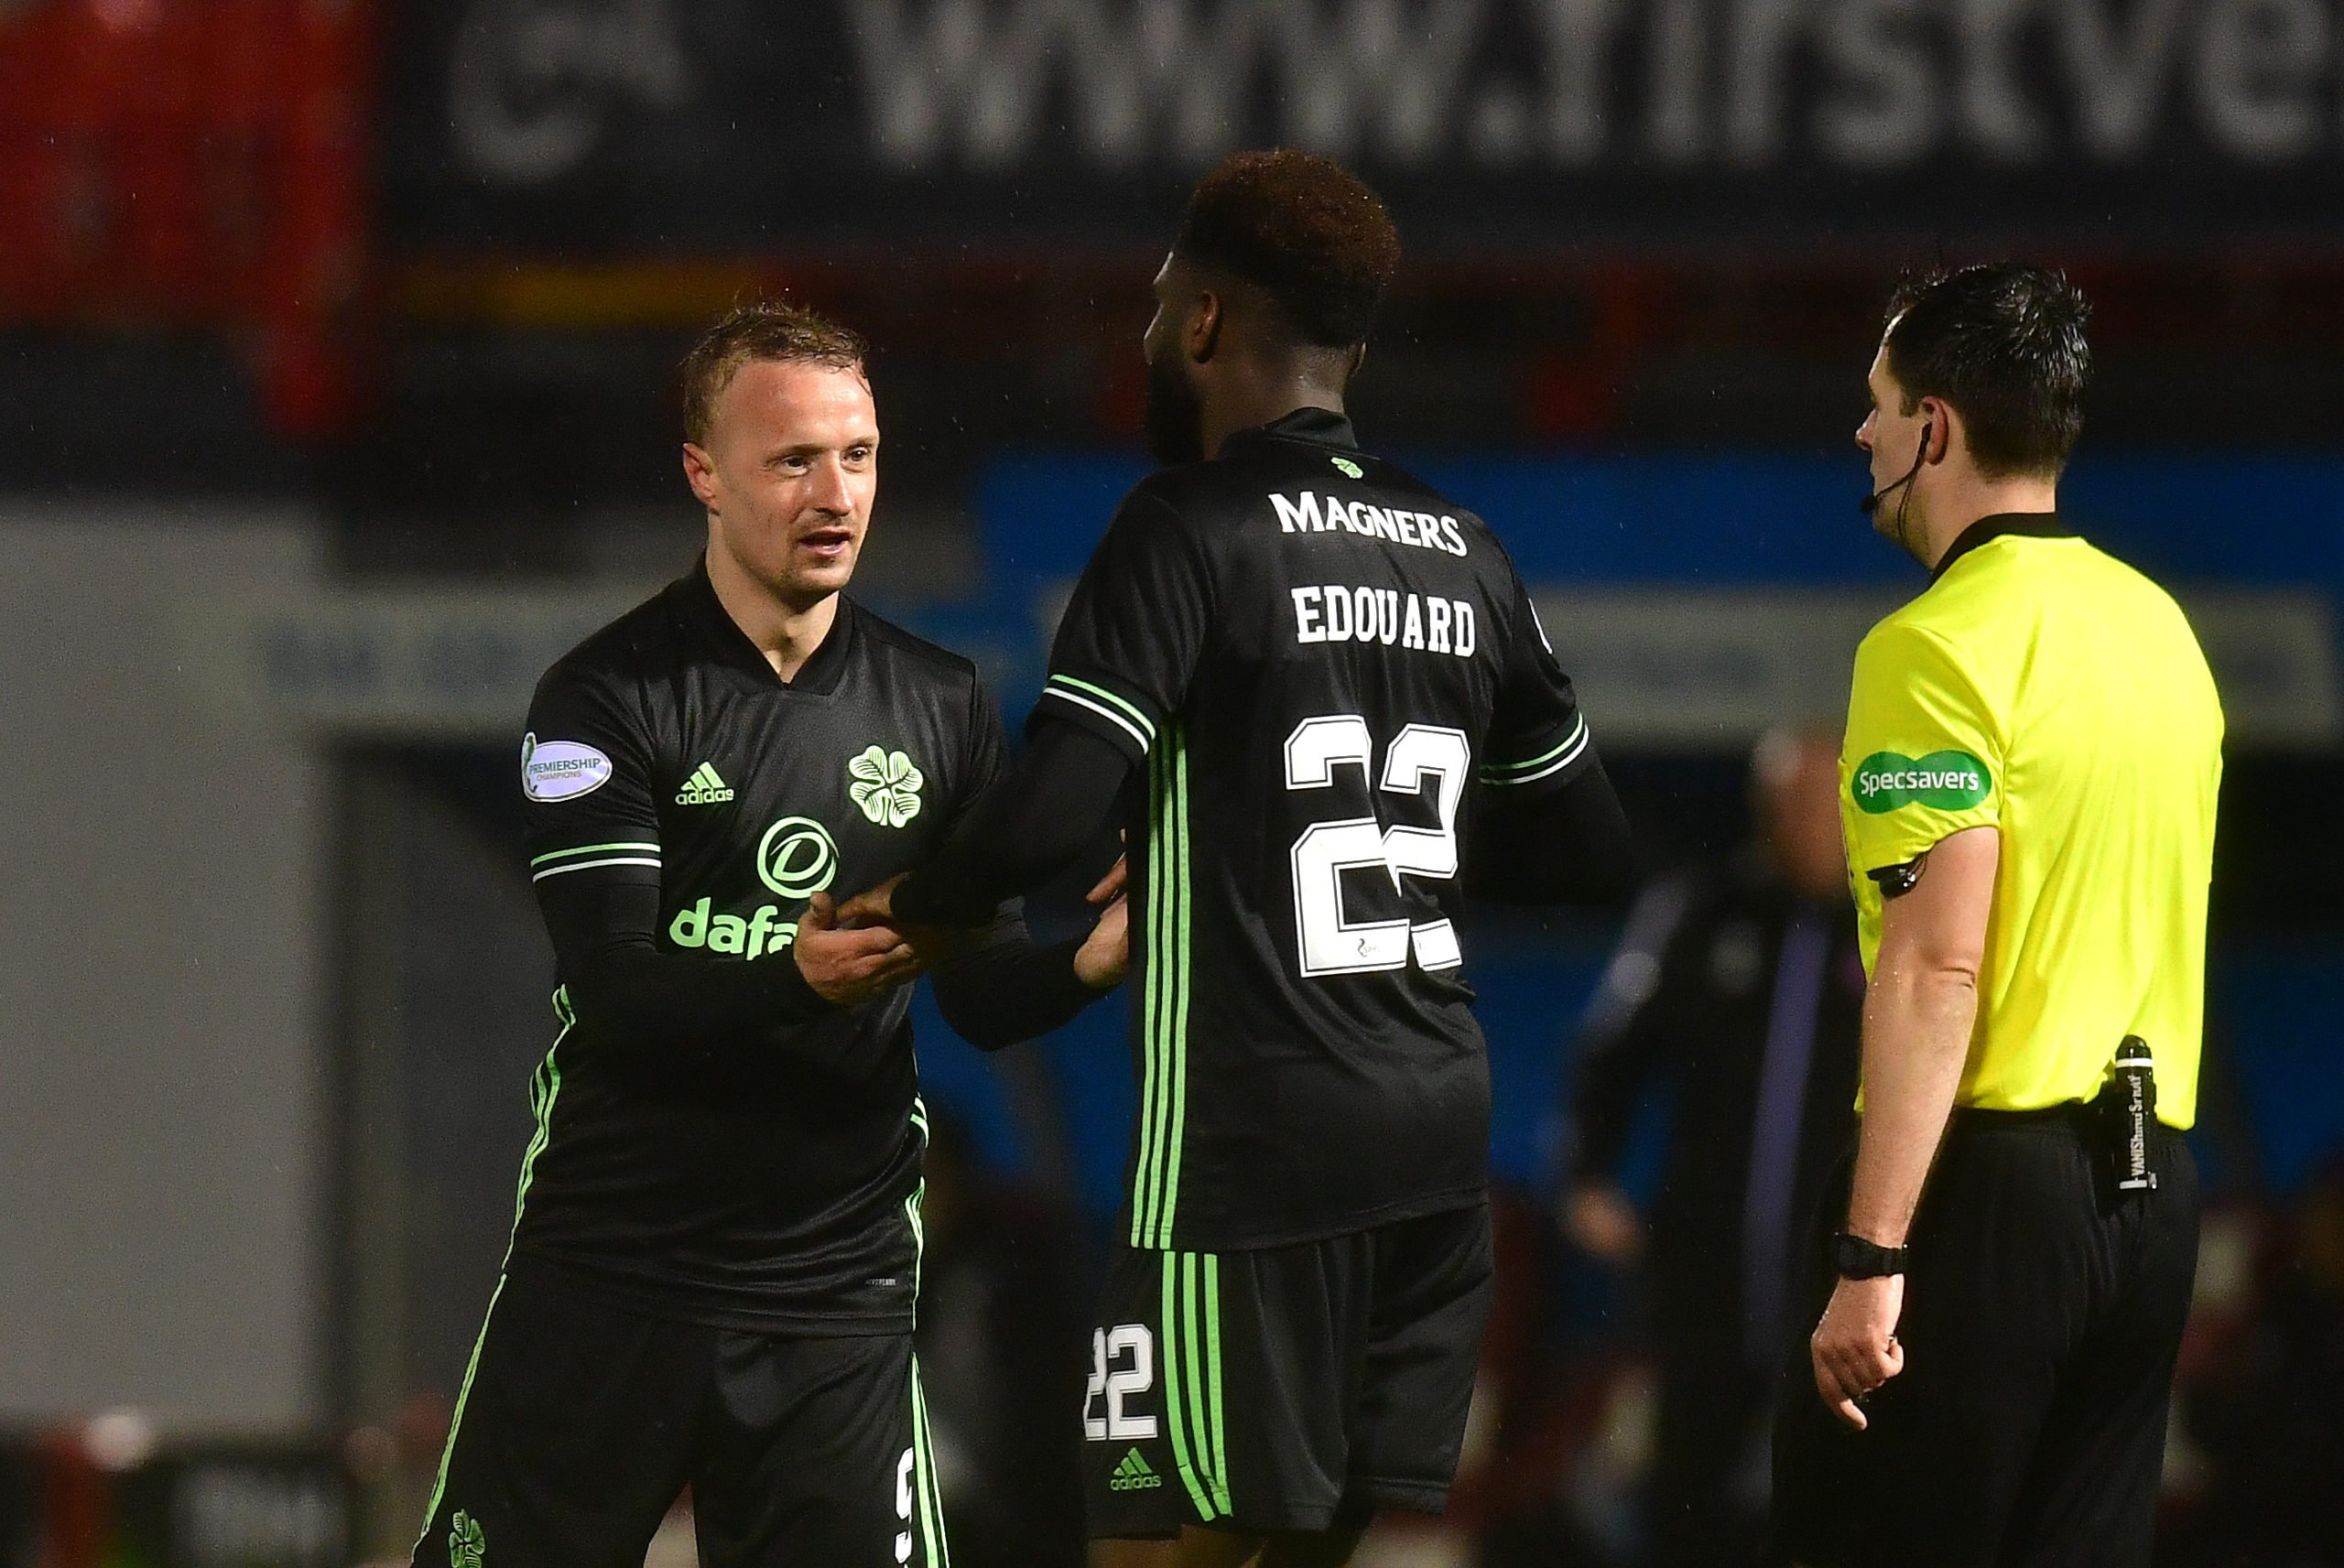 Celtic strike duo Leigh Griffiths and Odsonne Edouard